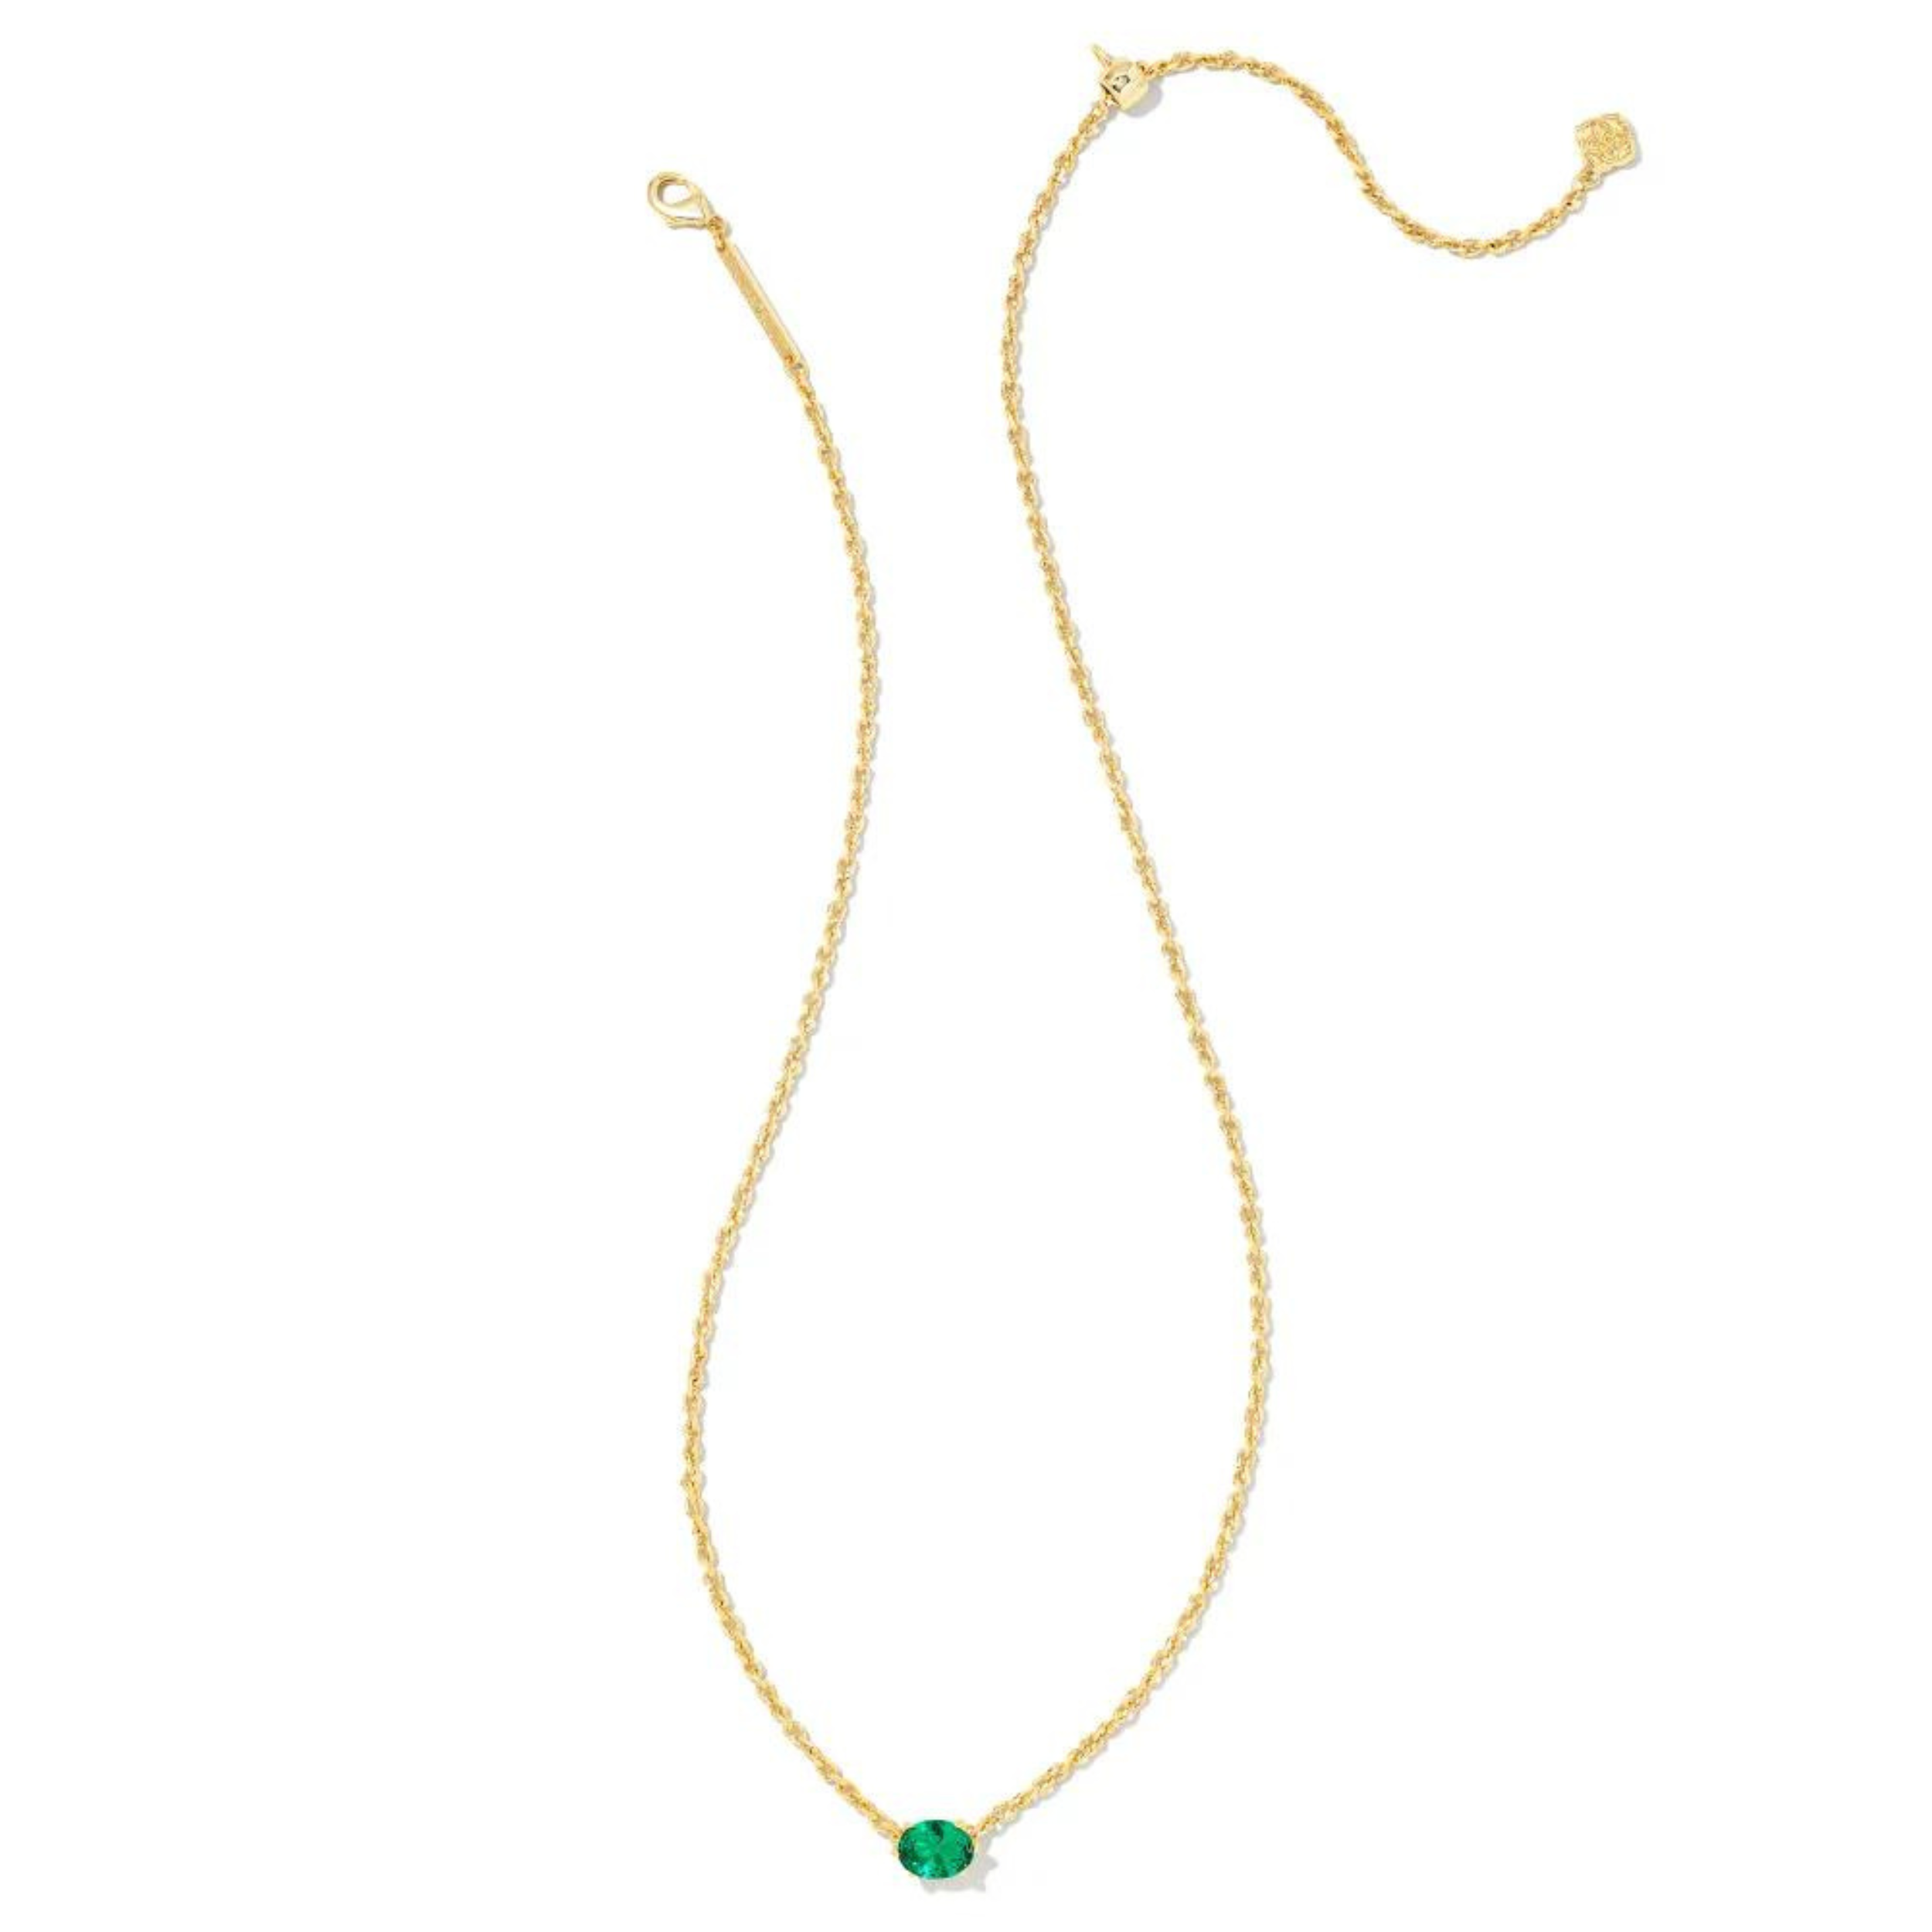 Kendra Scott | Cailin Gold Pendant Necklace in Green Crystal - Giddy Up Glamour Boutique